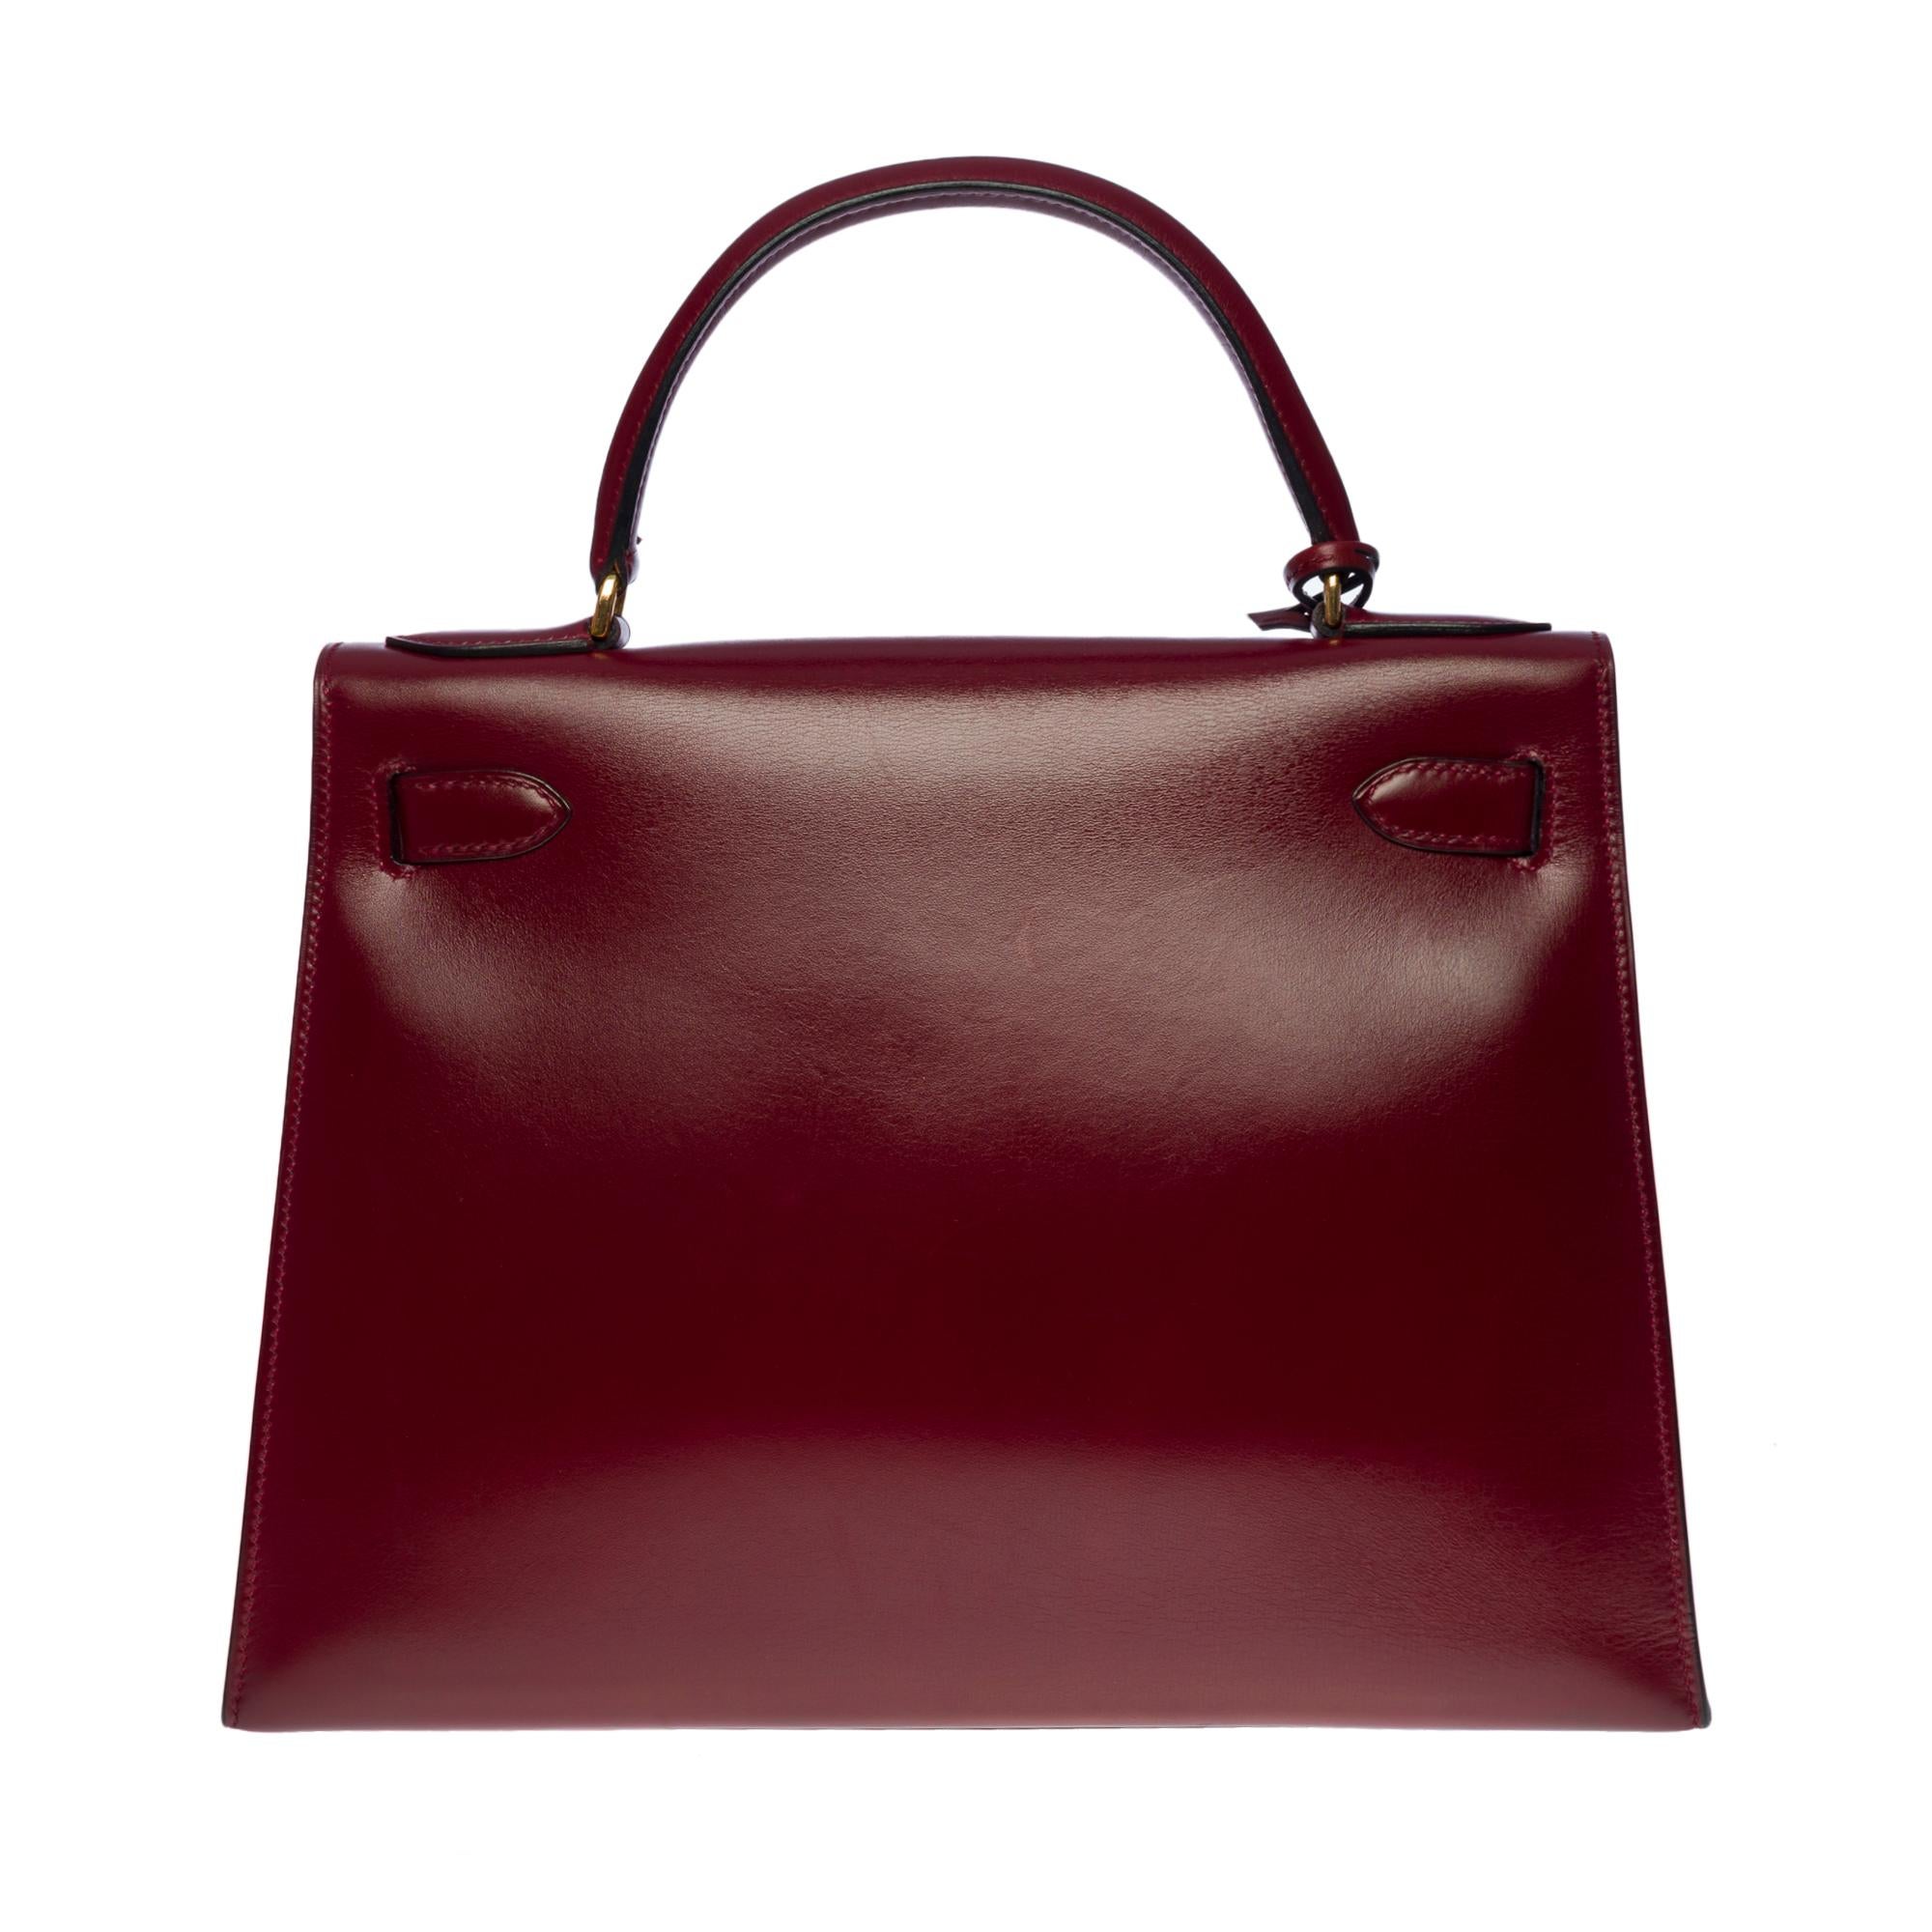 Exquisite Hermes Kelly 28 sellier handbag in Rouge H (burgundy) box calf leather, gold plated metal hardware, leather handle box red allowing a hand carry
Flap closure
Red leather lining, one zippered pocket, two patch pockets
Signature: 